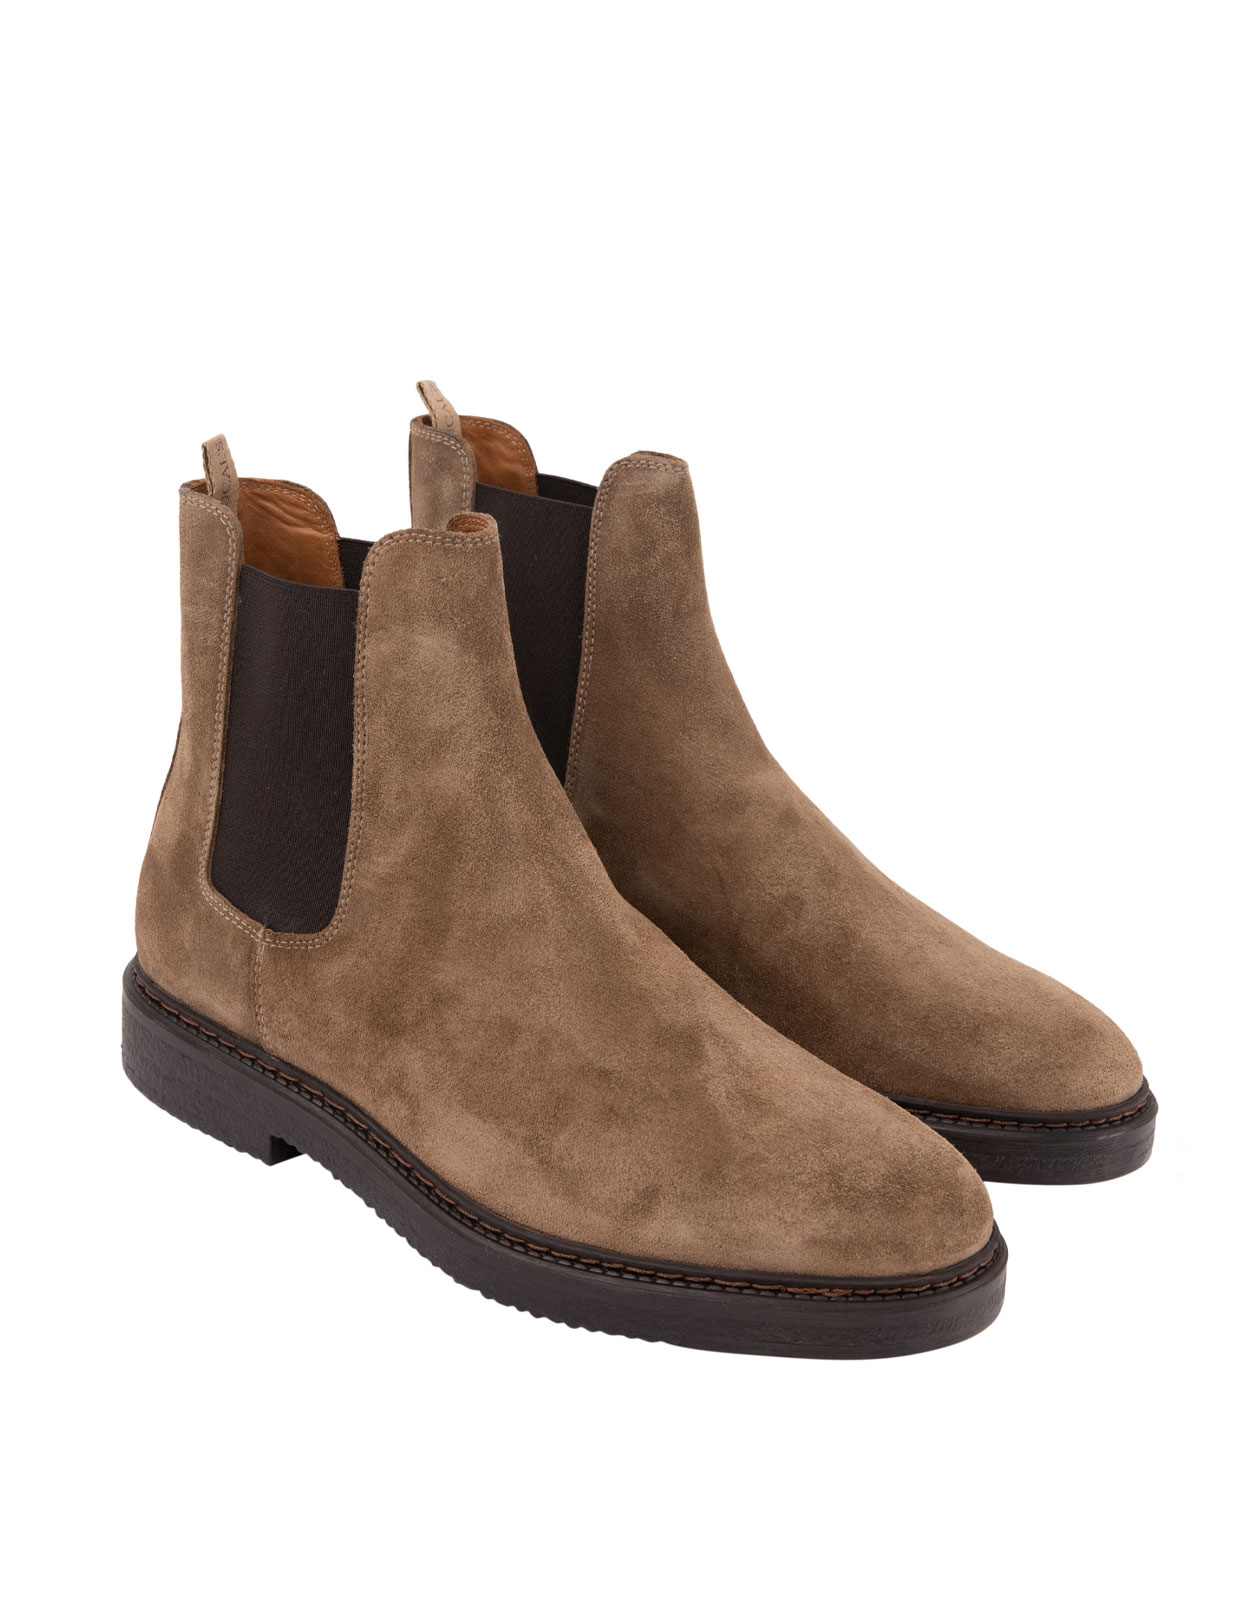 Chelsea Boots Tabacco Stl 43.5